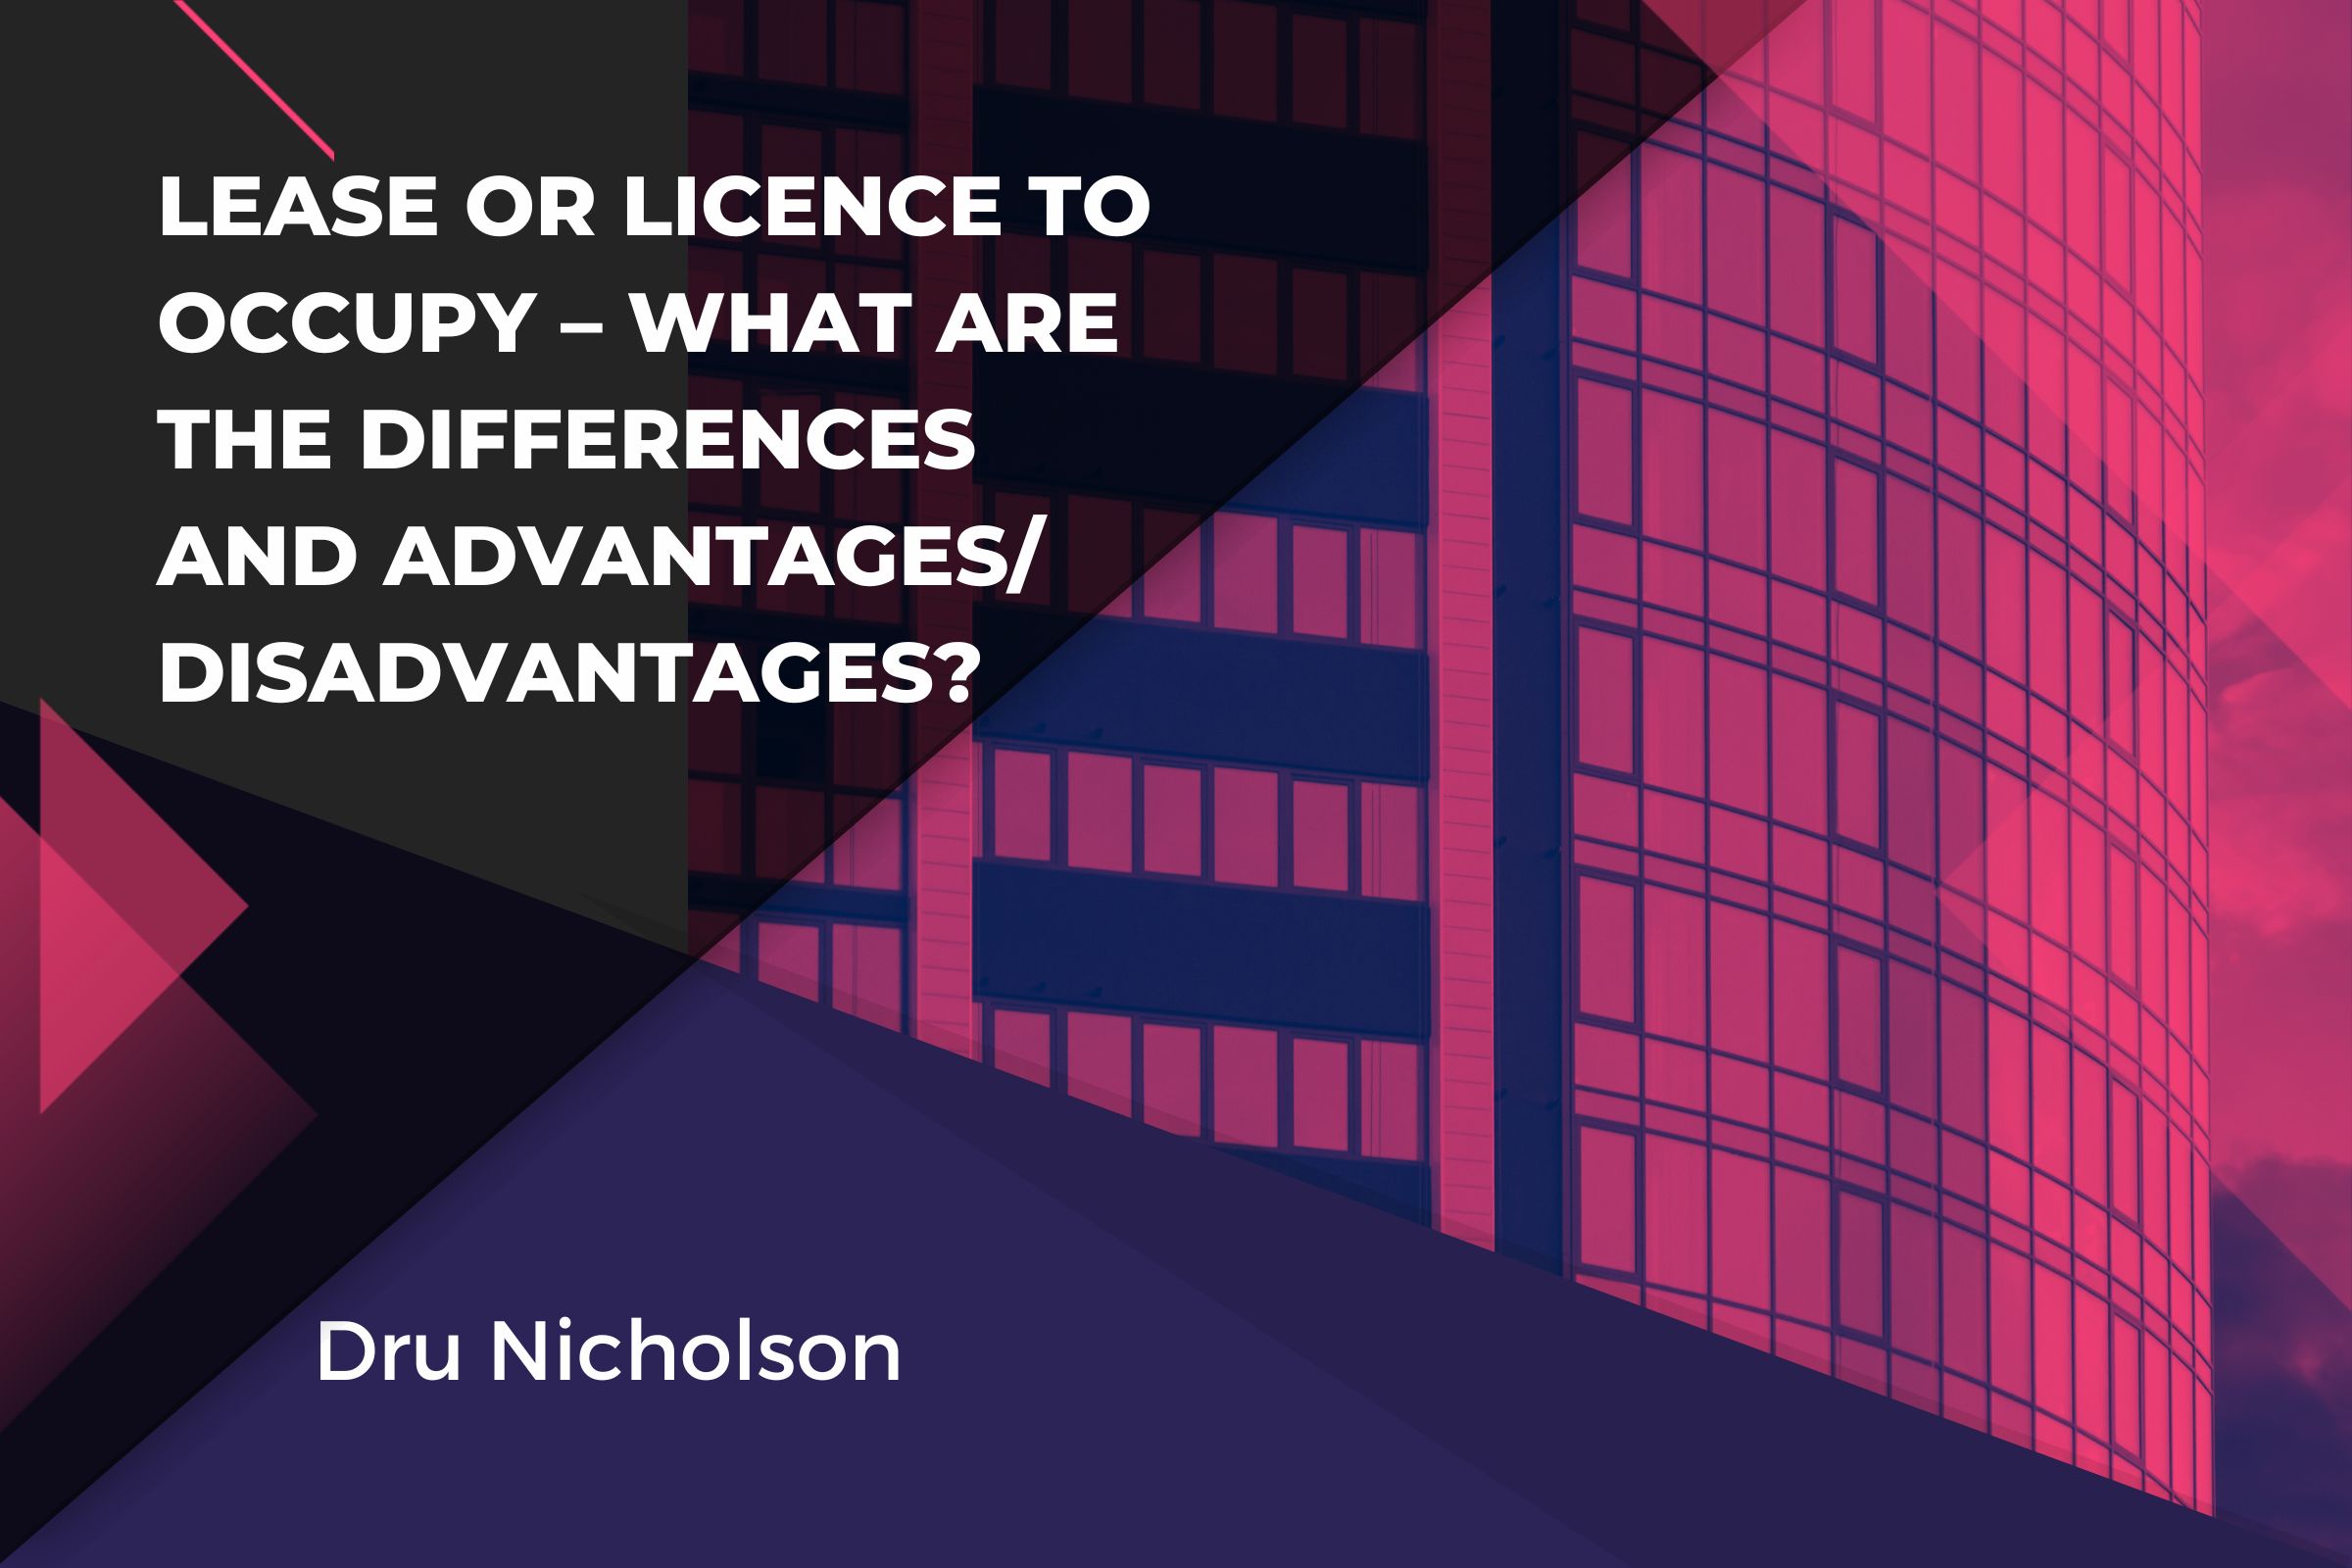 Lease or Licence to Occupy – what are the differences and advantages/disadvantages?